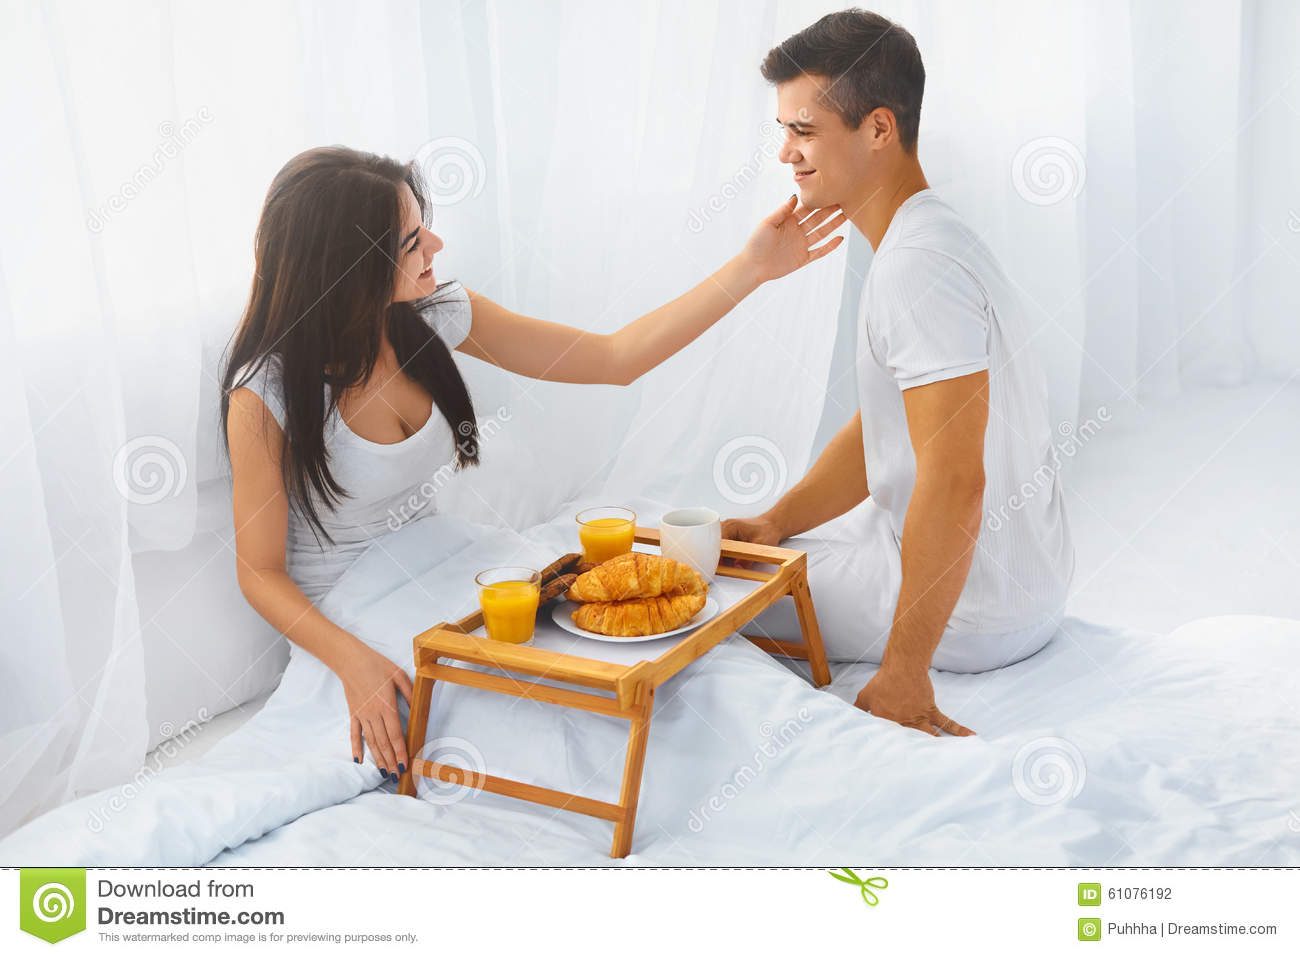 husband-serving-wife-breakfast-bed-young-handsome-his-beautiful-happy-love-care-relationships-concepts-61076192.jpg